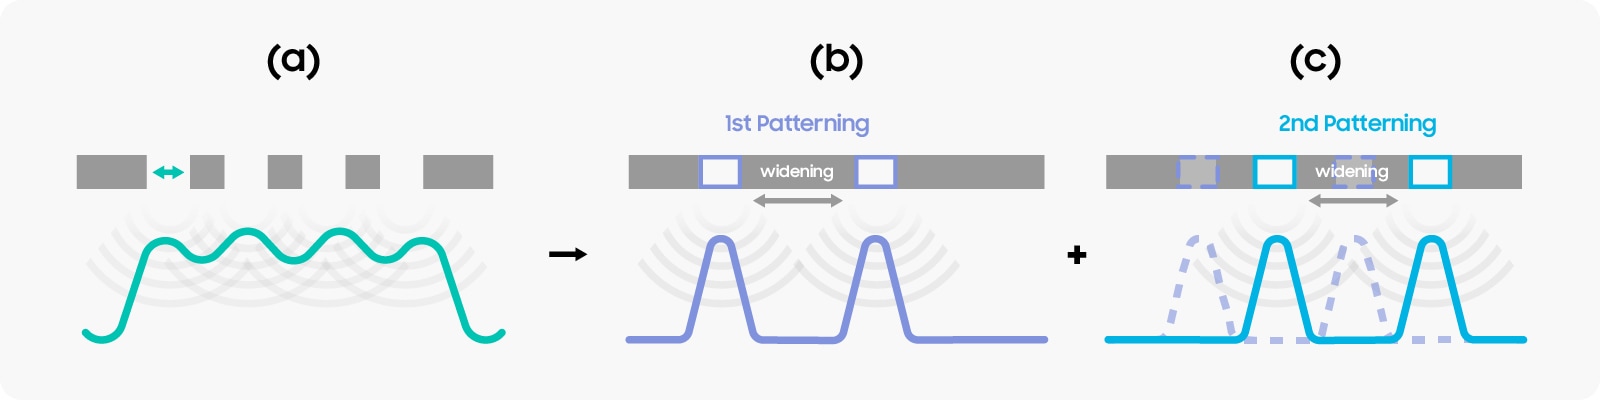 Figure [5] If slit spacing is too small for proper patterning, as shown in (a), the process can be divided into two steps - (b) and (c) - with greater slit spacing, achieving the desired patterning